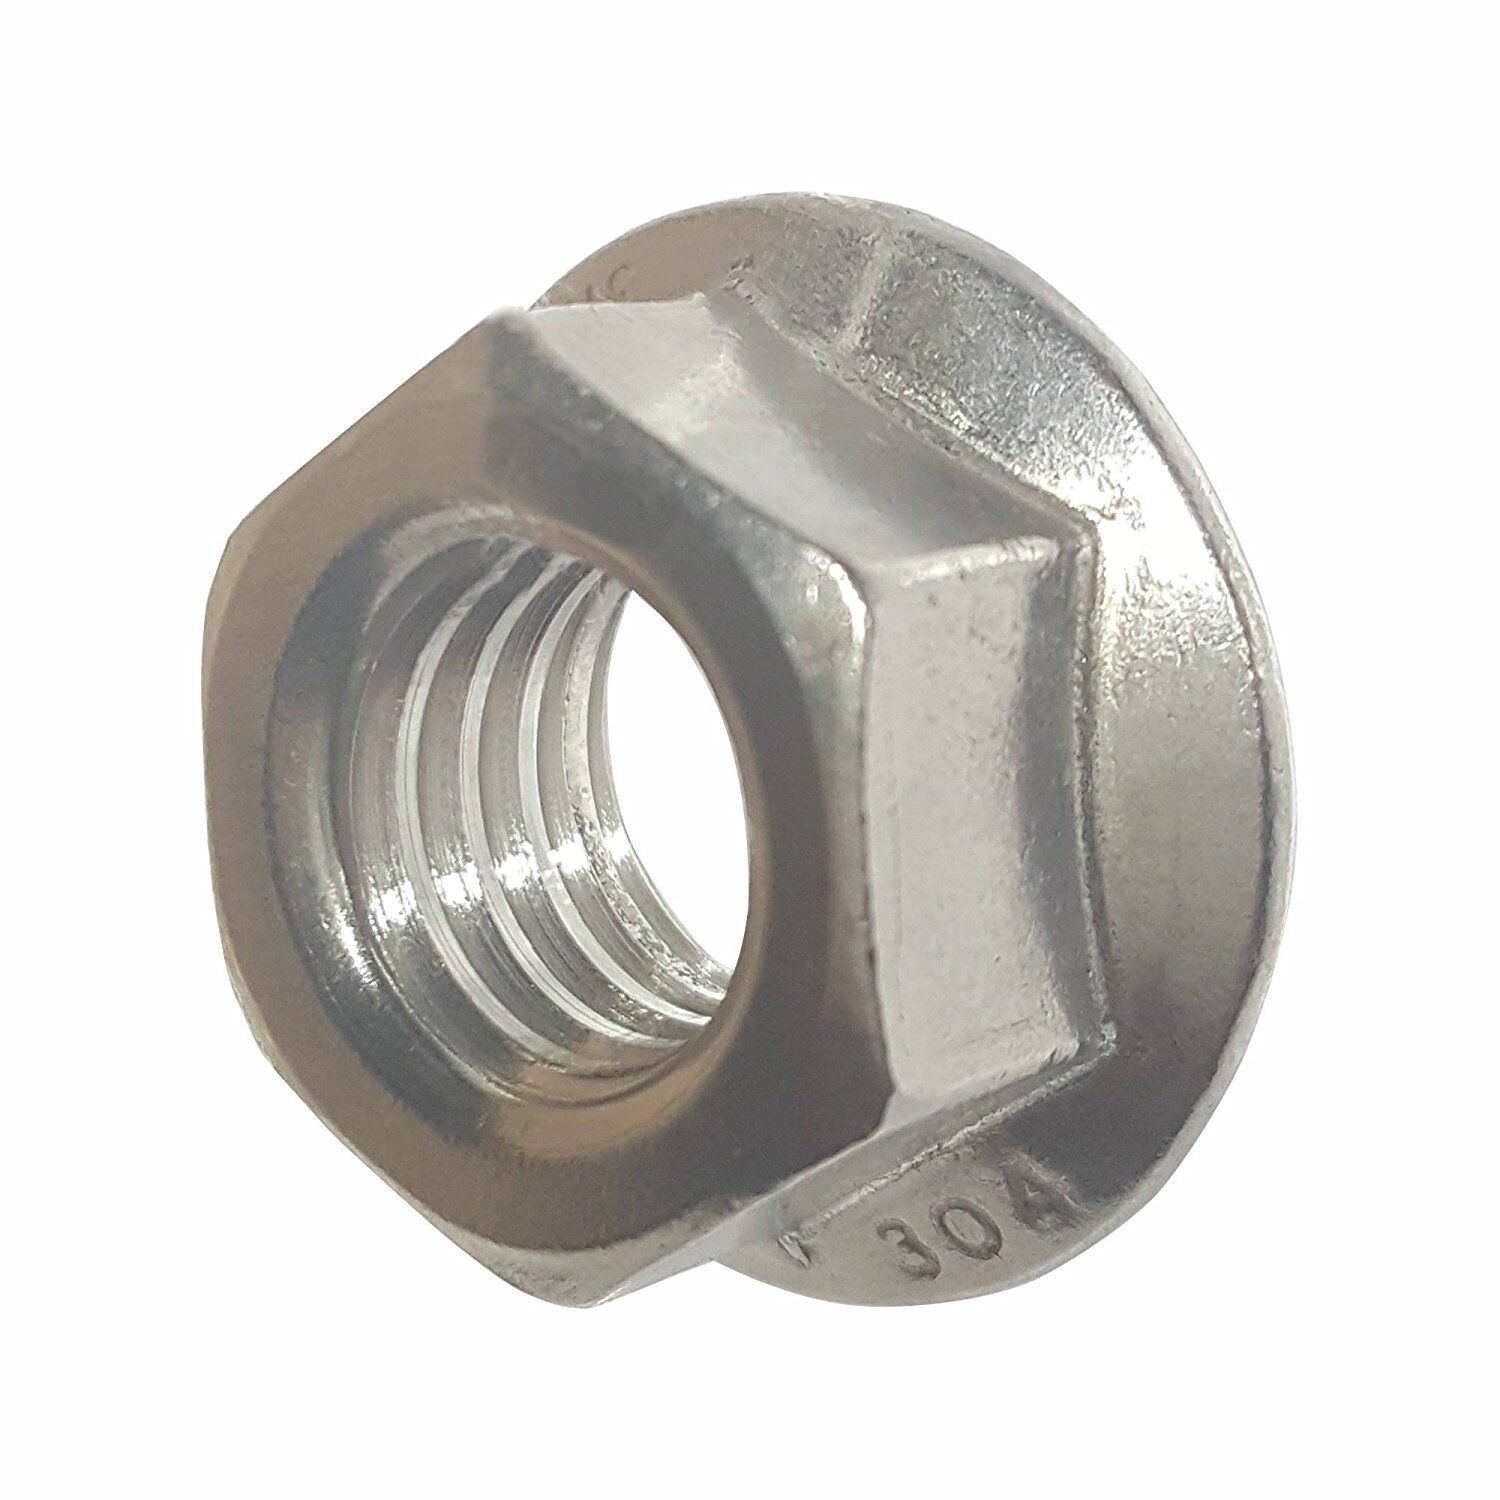 Flange Nuts Stainless Steel, Serrated Base for Locking All Sizes Available